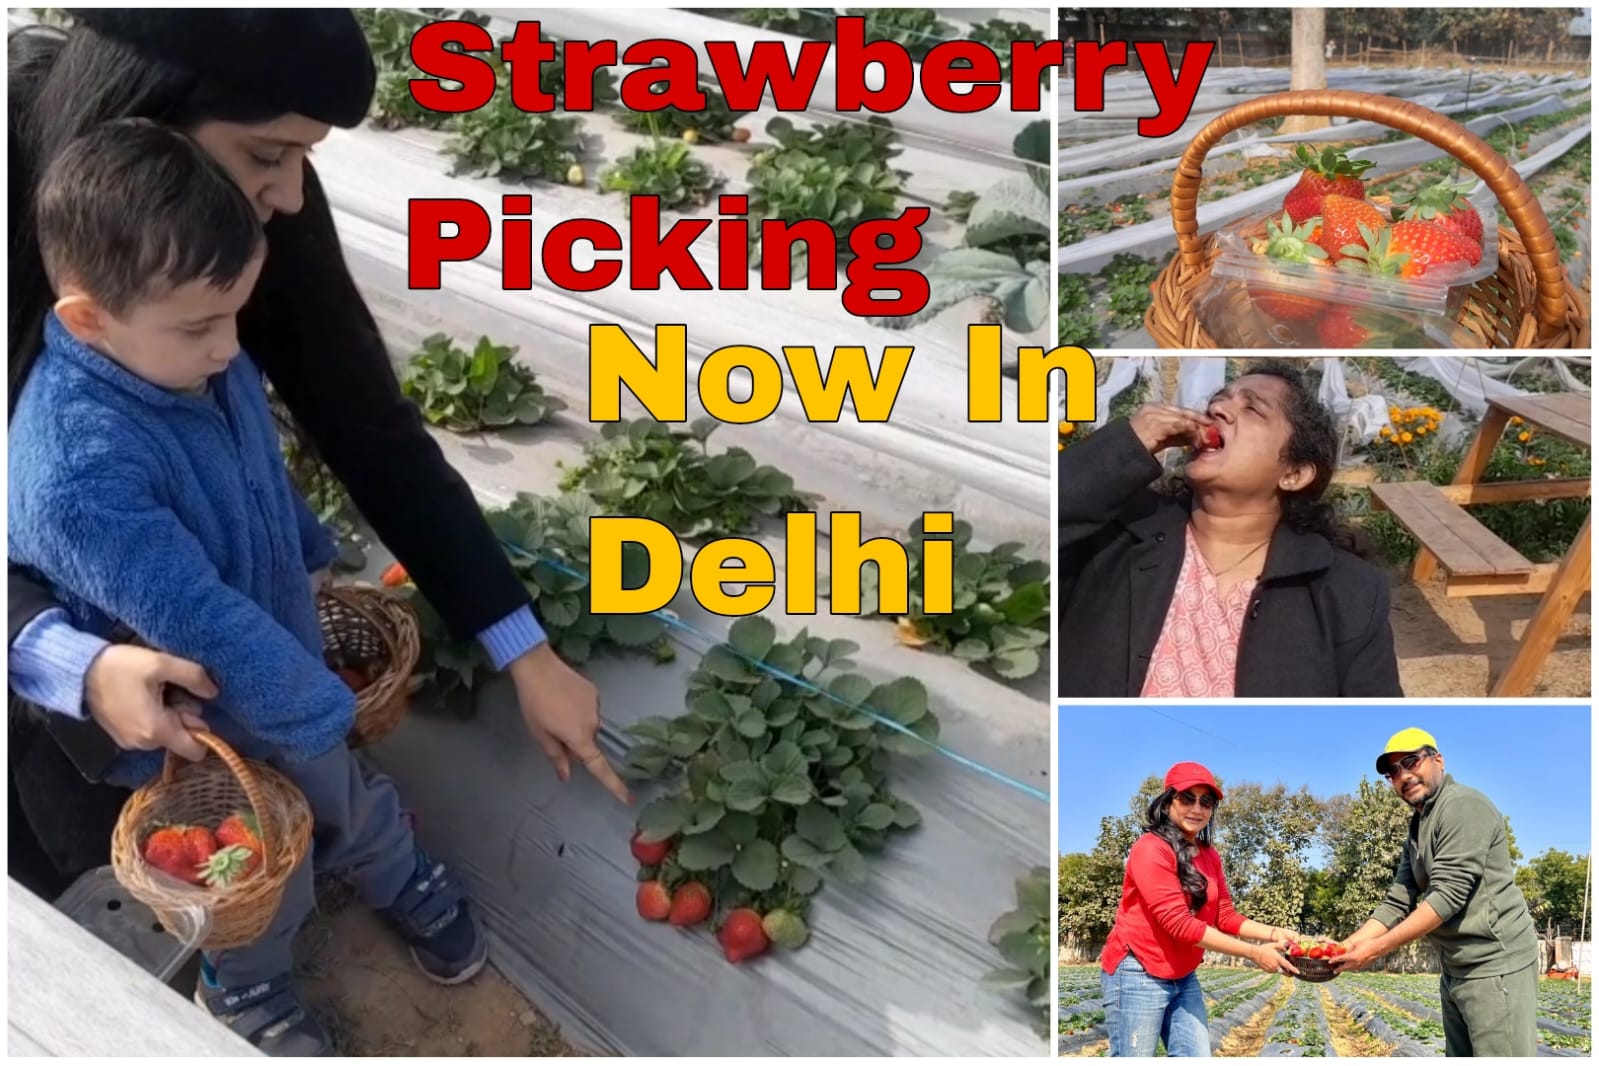 Strawberry Picking Opened To Public, First Time In Delhi - LIFESTYLE TODAY NEWS